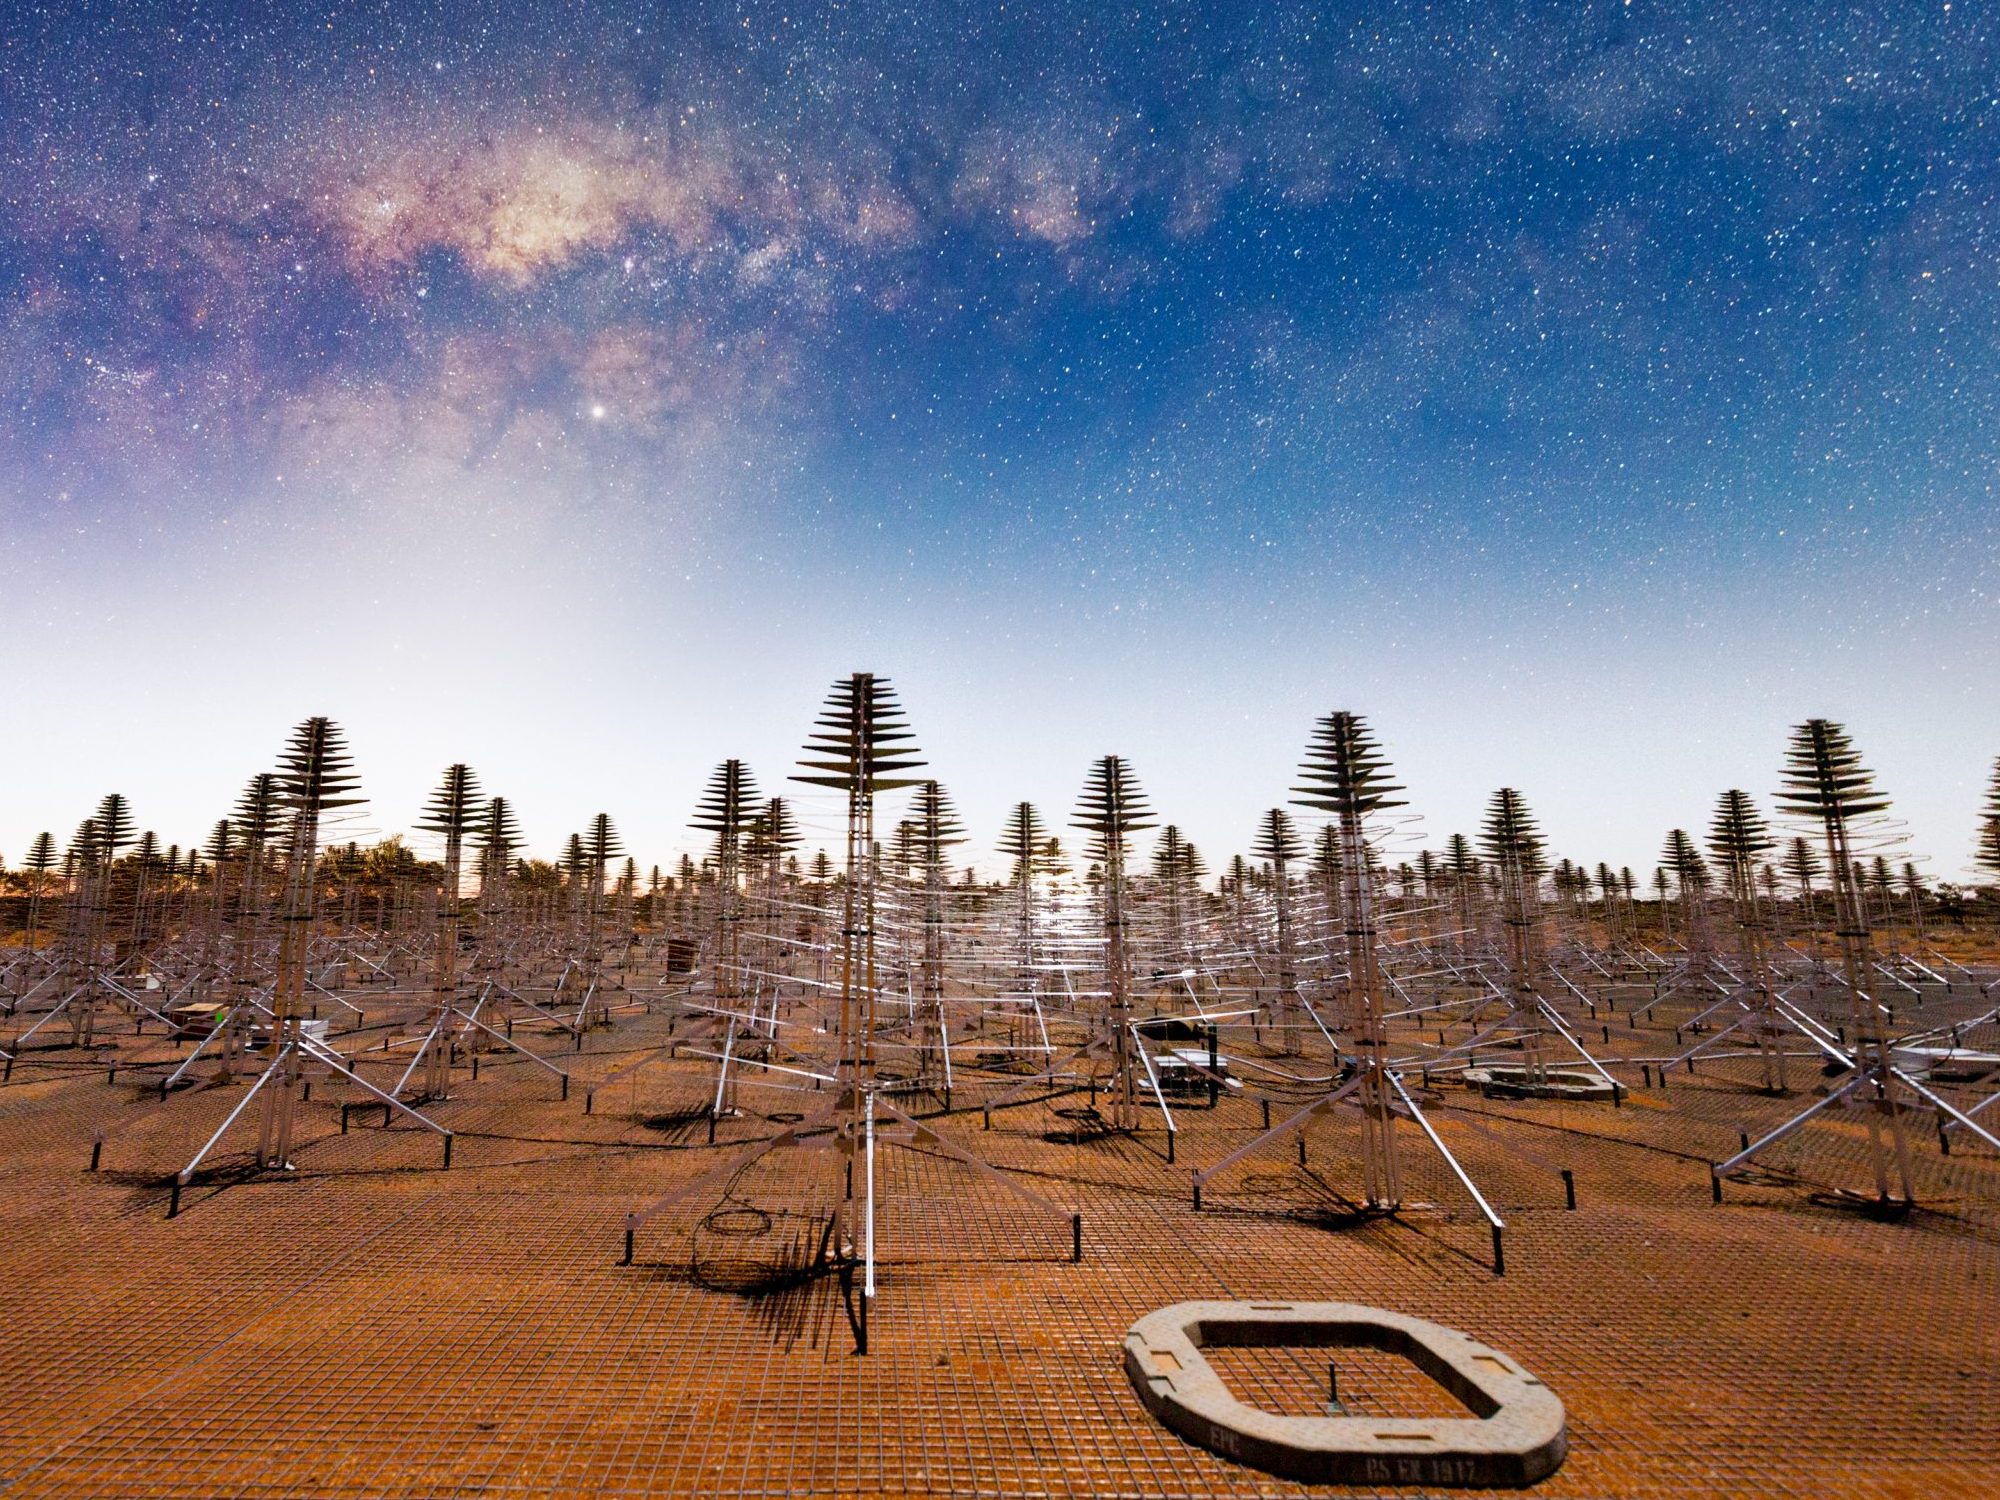 Array of Australian radio telescope prototypes built in the Outback against a sky showing stars and the Milky Way galaxy